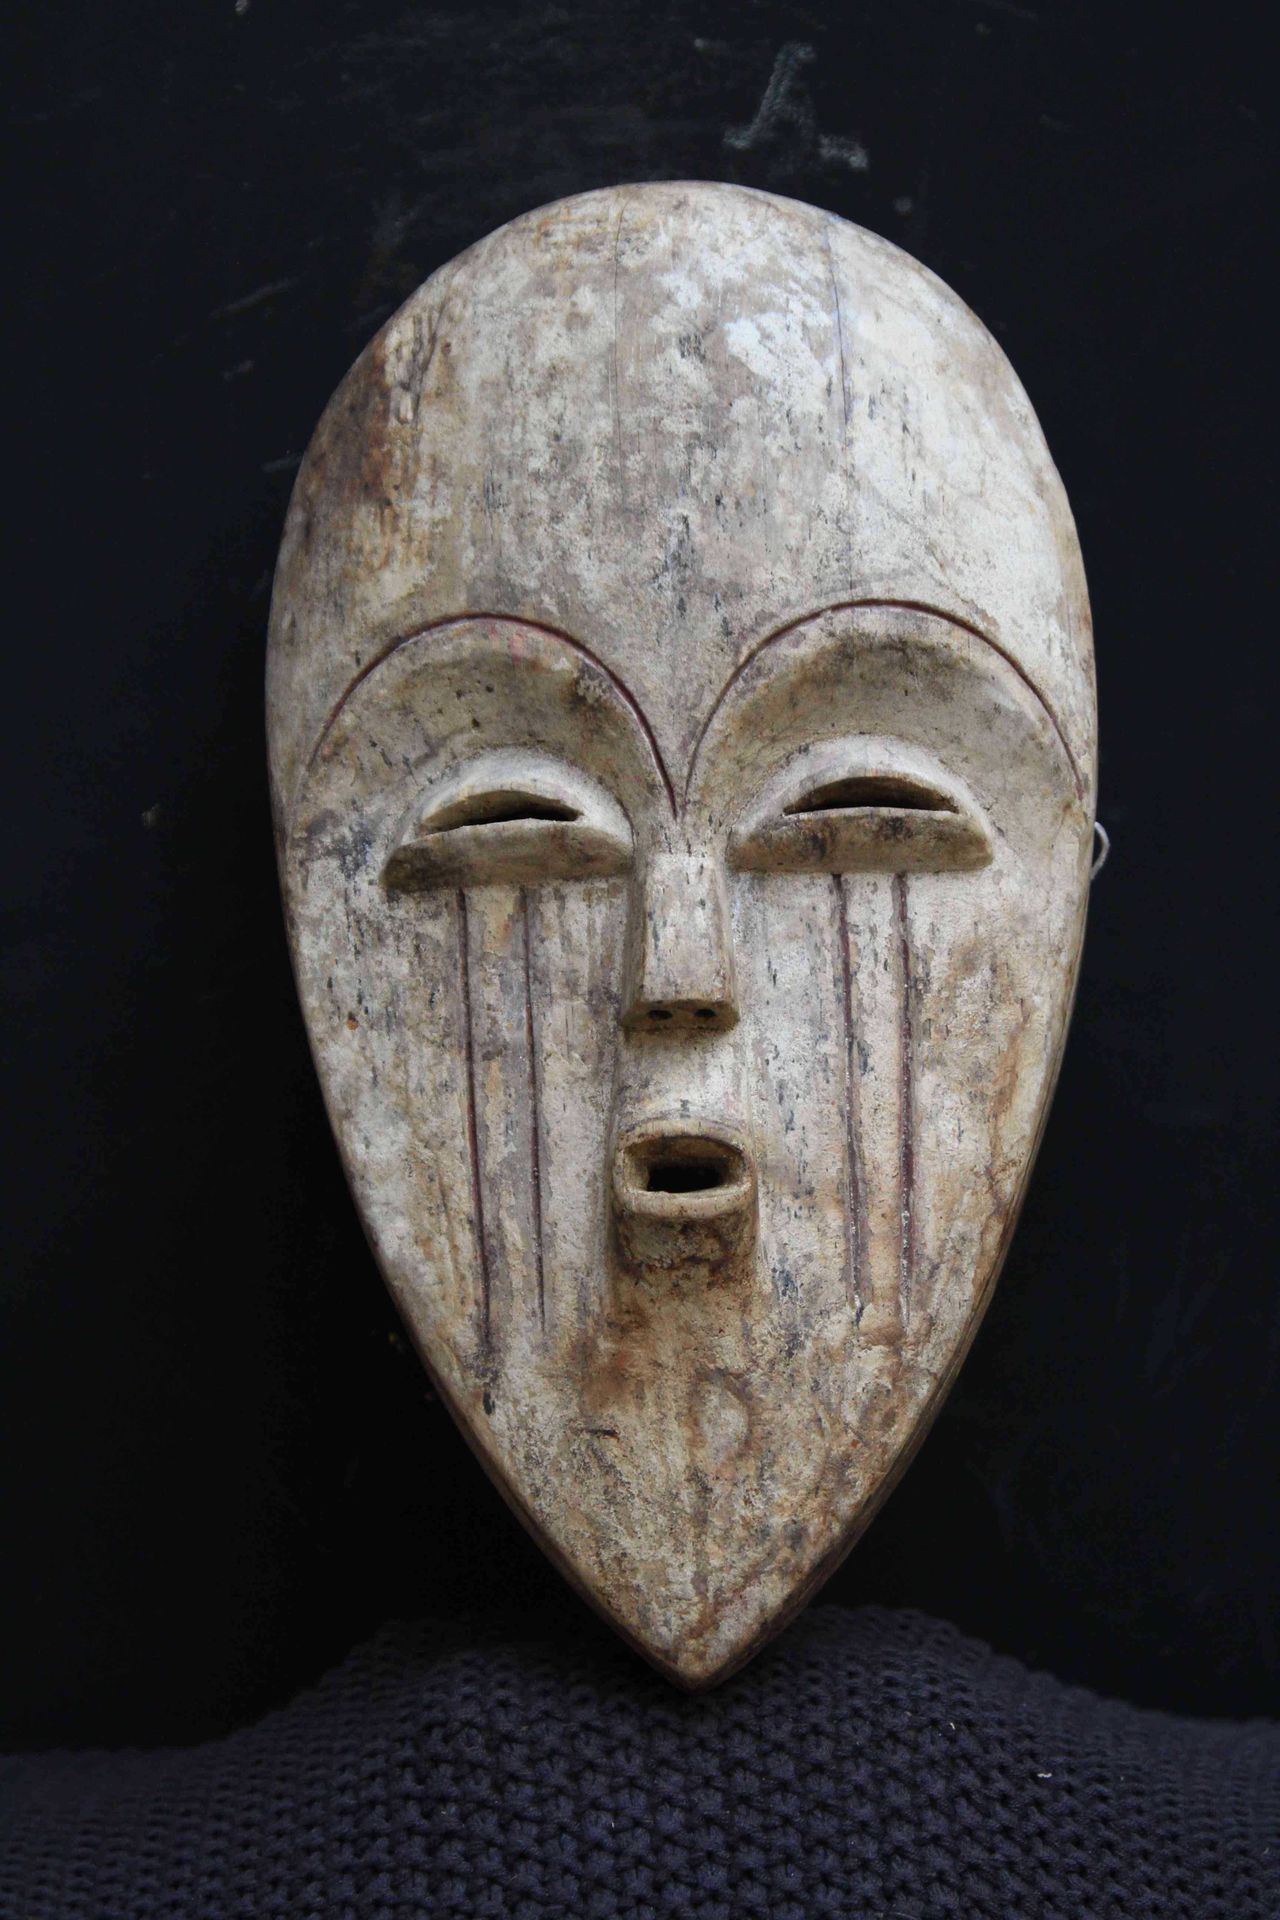 Null Vuvi mask
Gabon
Wood
Height : 34 cm
Mask with a whitened heart-shaped face.&hellip;